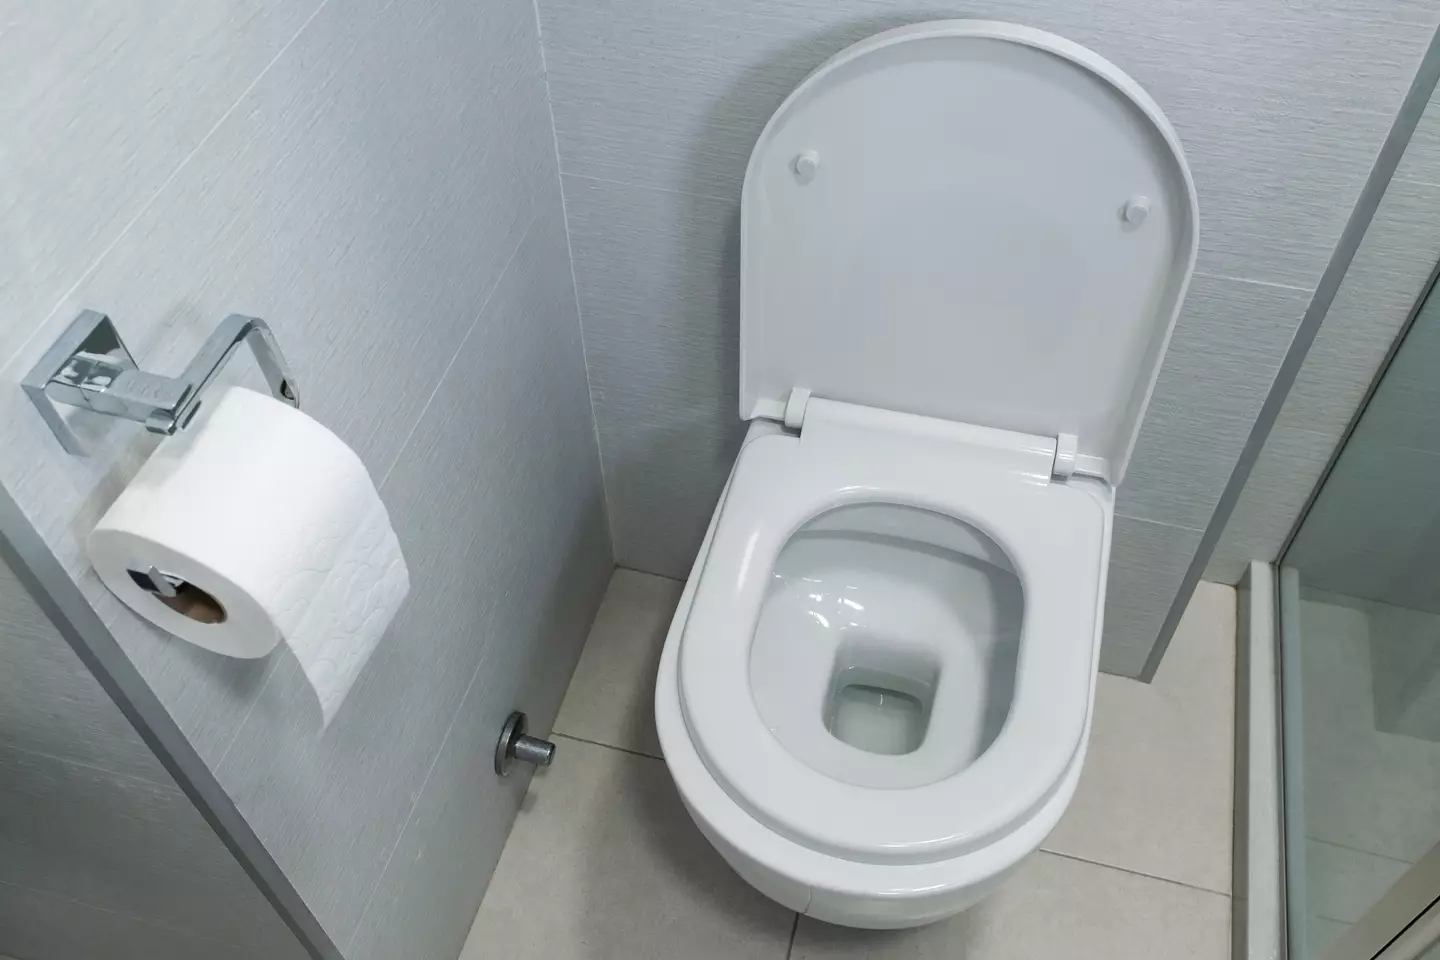 The gross reason behind why you should put the toilet seat down before flushing has been revealed.